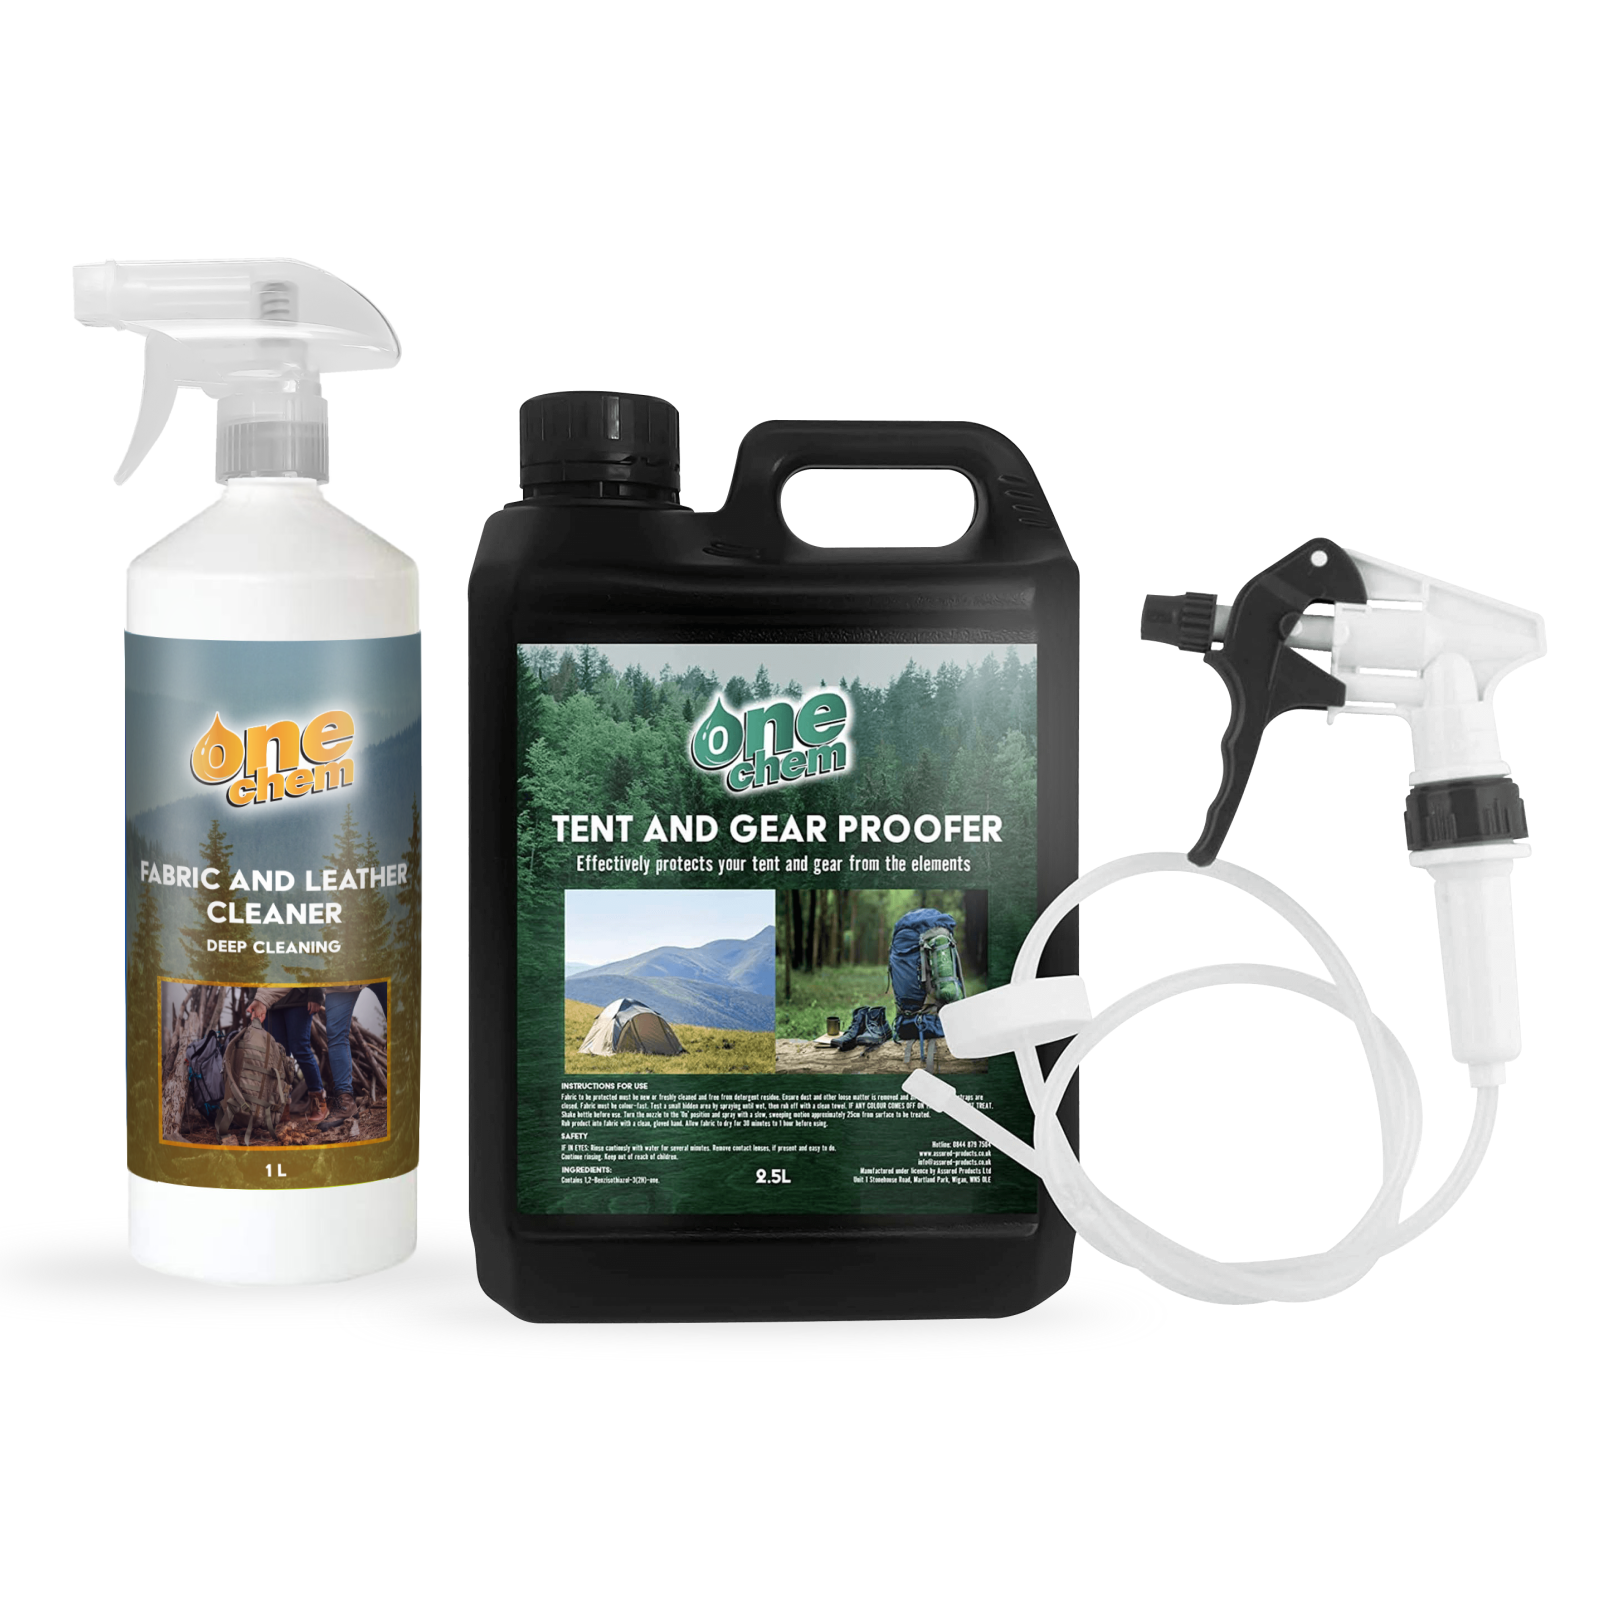 One Chem - Tent and Gear 2.5L & Fabric & Leather Cleaner 1L